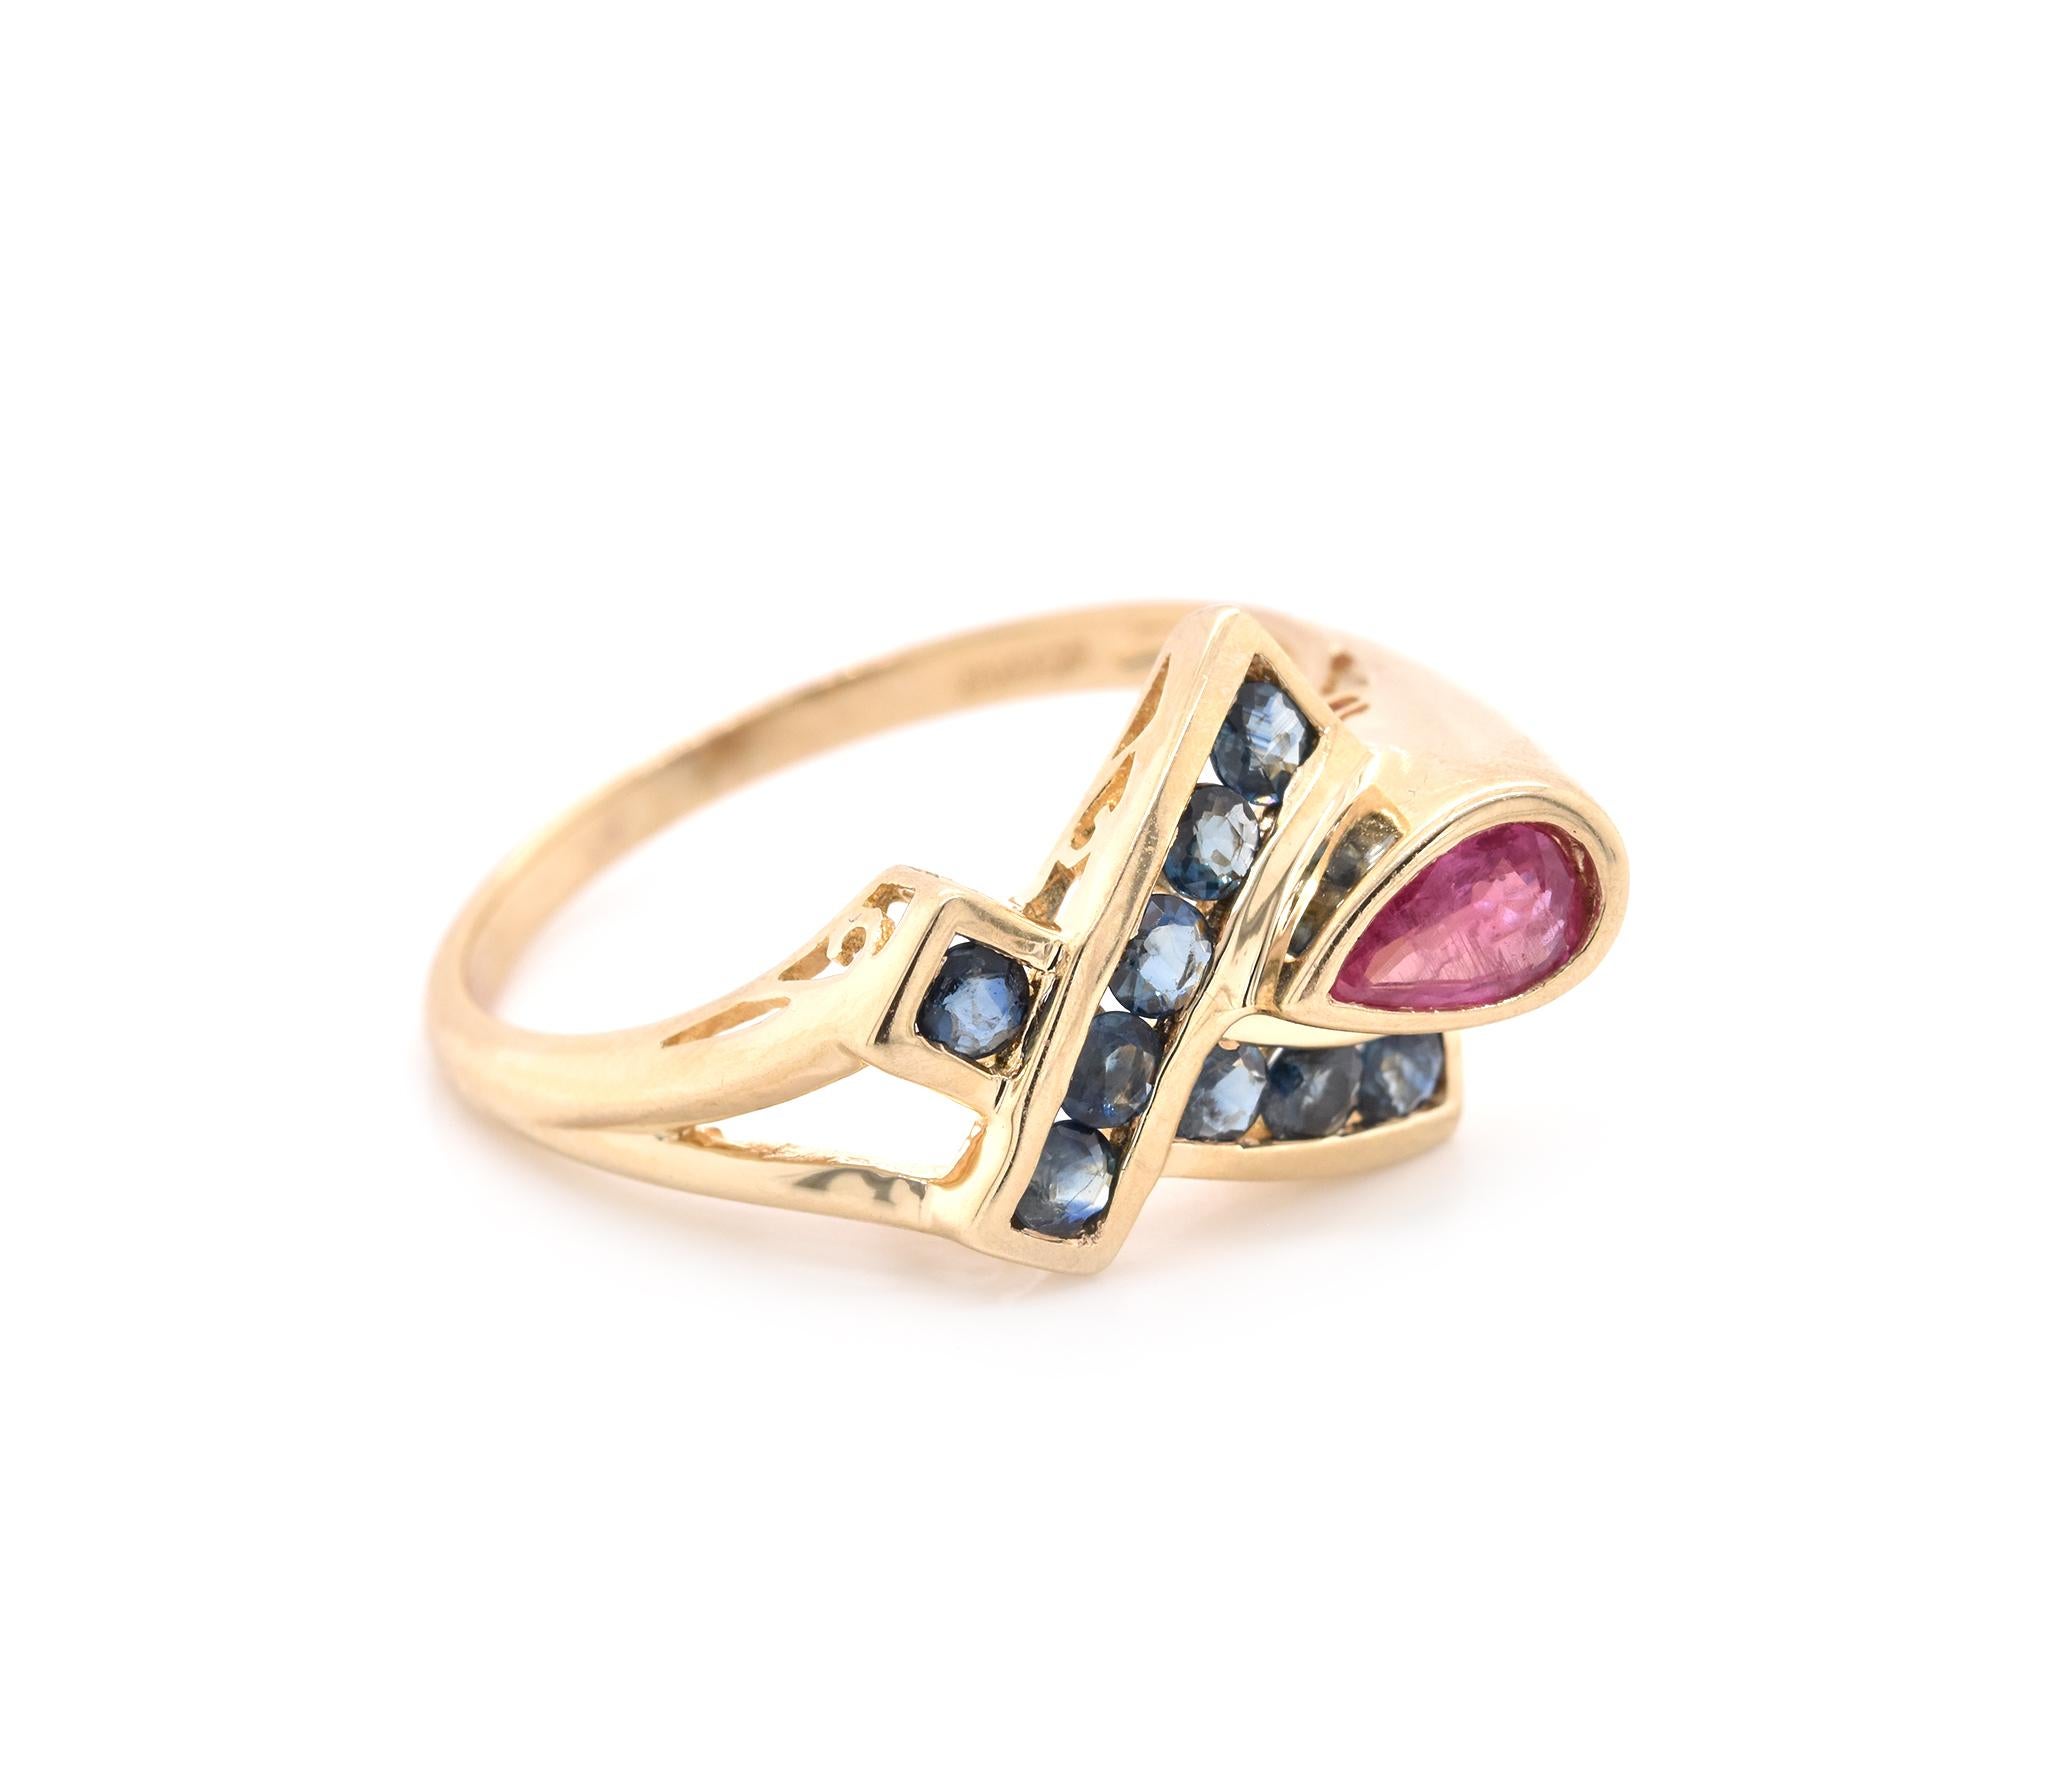 Designer: custom design
Material: 10k yellow gold
Gemstone: 9 round blue sapphires and 1 pear cut pink sapphire
Ring Size: 9 ¾ (please allow two additional shipping days for sizing requests)
Dimensions: ring top measures 19.15mm x 13.30mm
Weight: